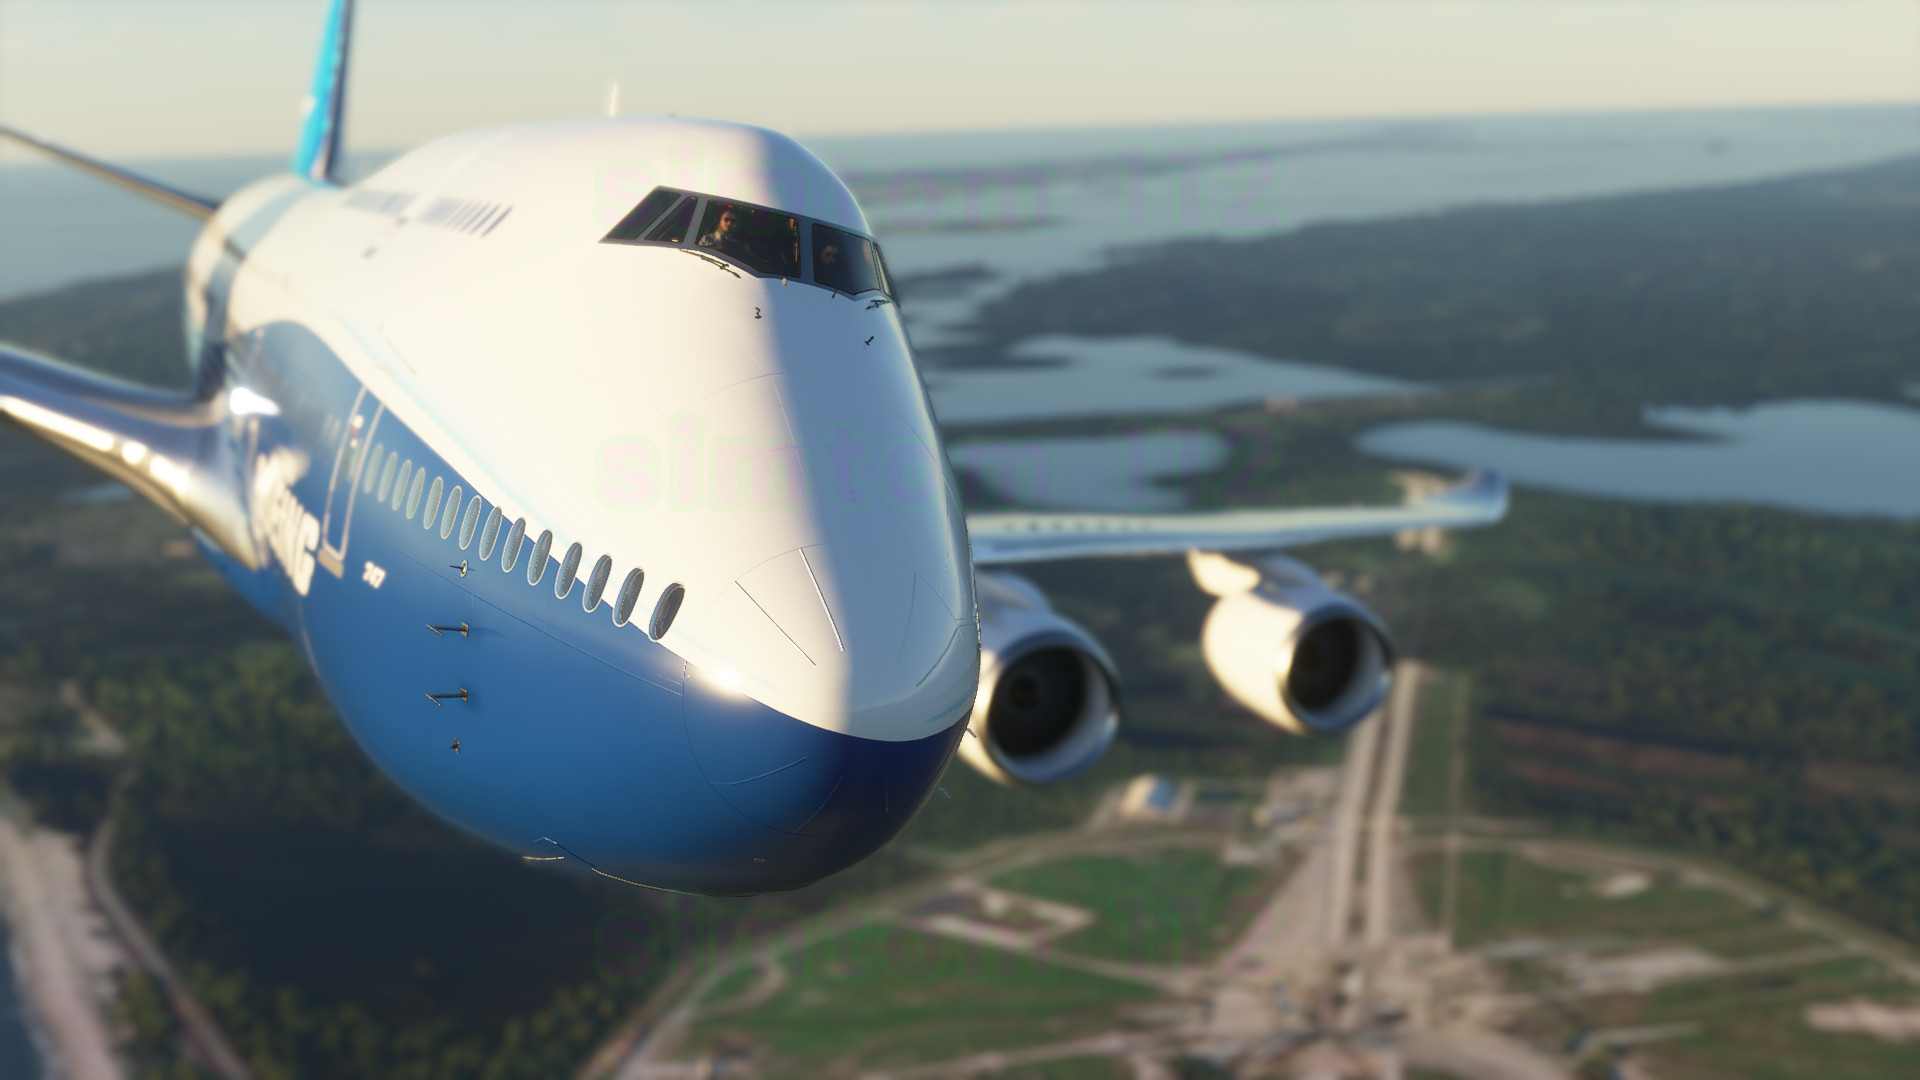 Microsoft Flight Simulator's latest patch notes released